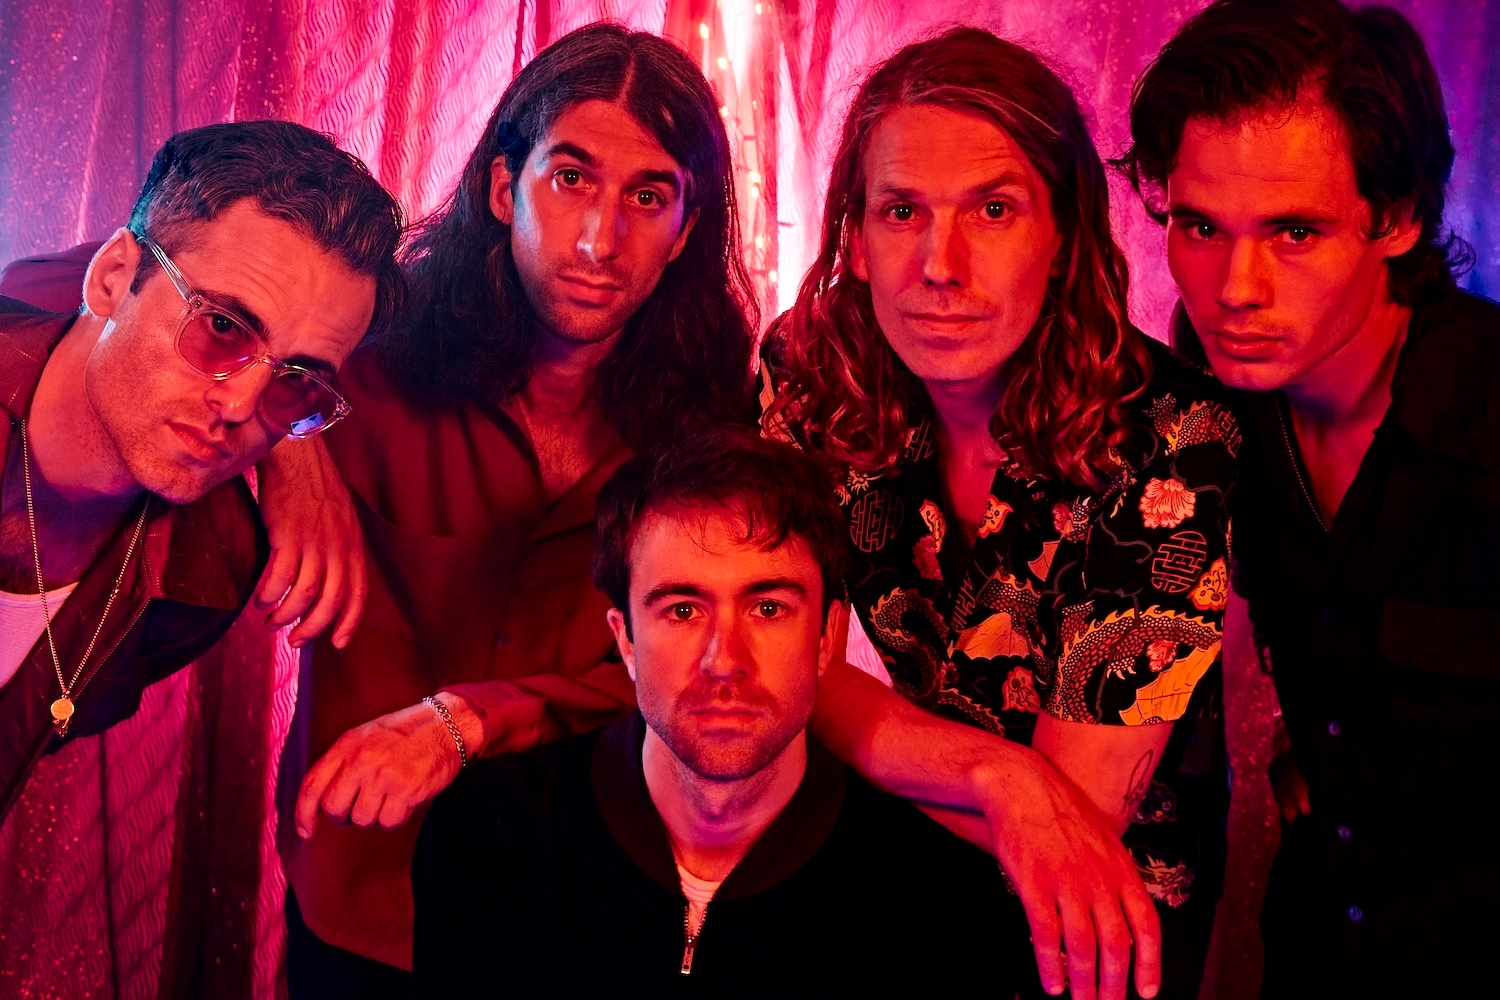 Watch The Vaccines perform 'Paranormal Romance' live at Abbey Road